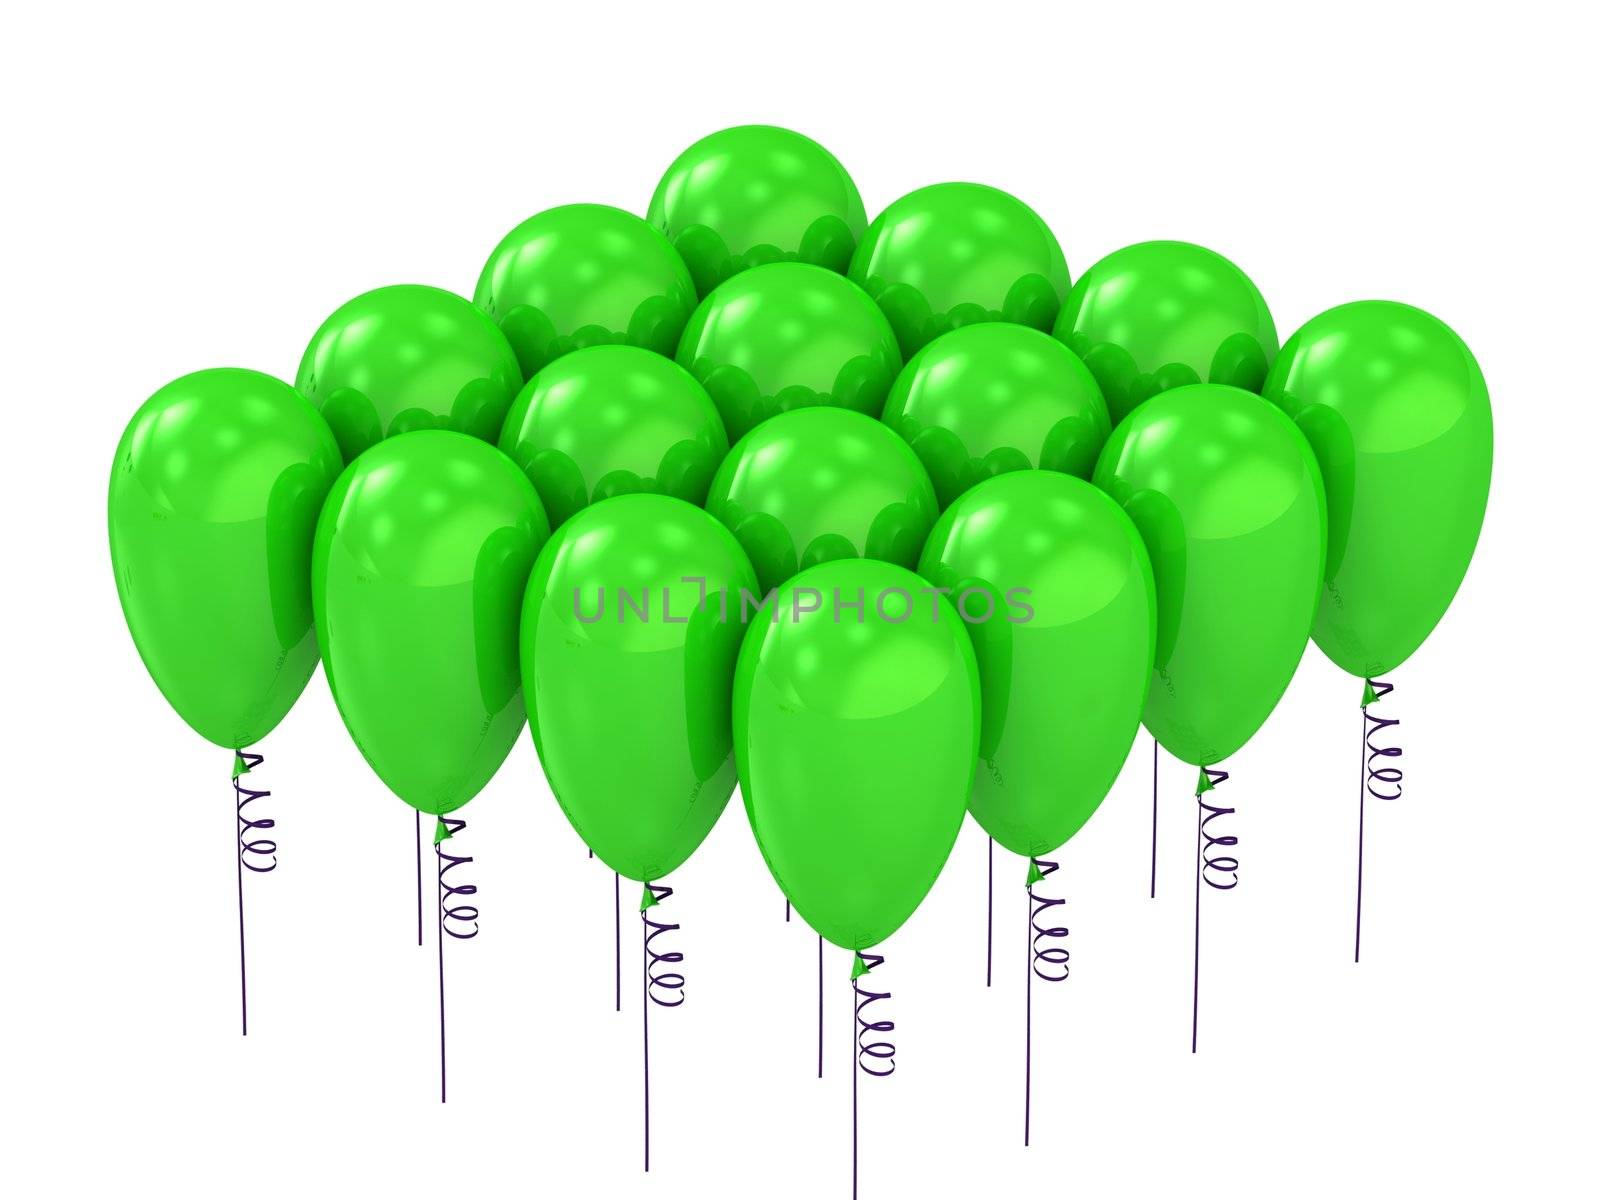 Balloons of colorful green rising up. Decoration for July 4th, birthday or anniversary celebration